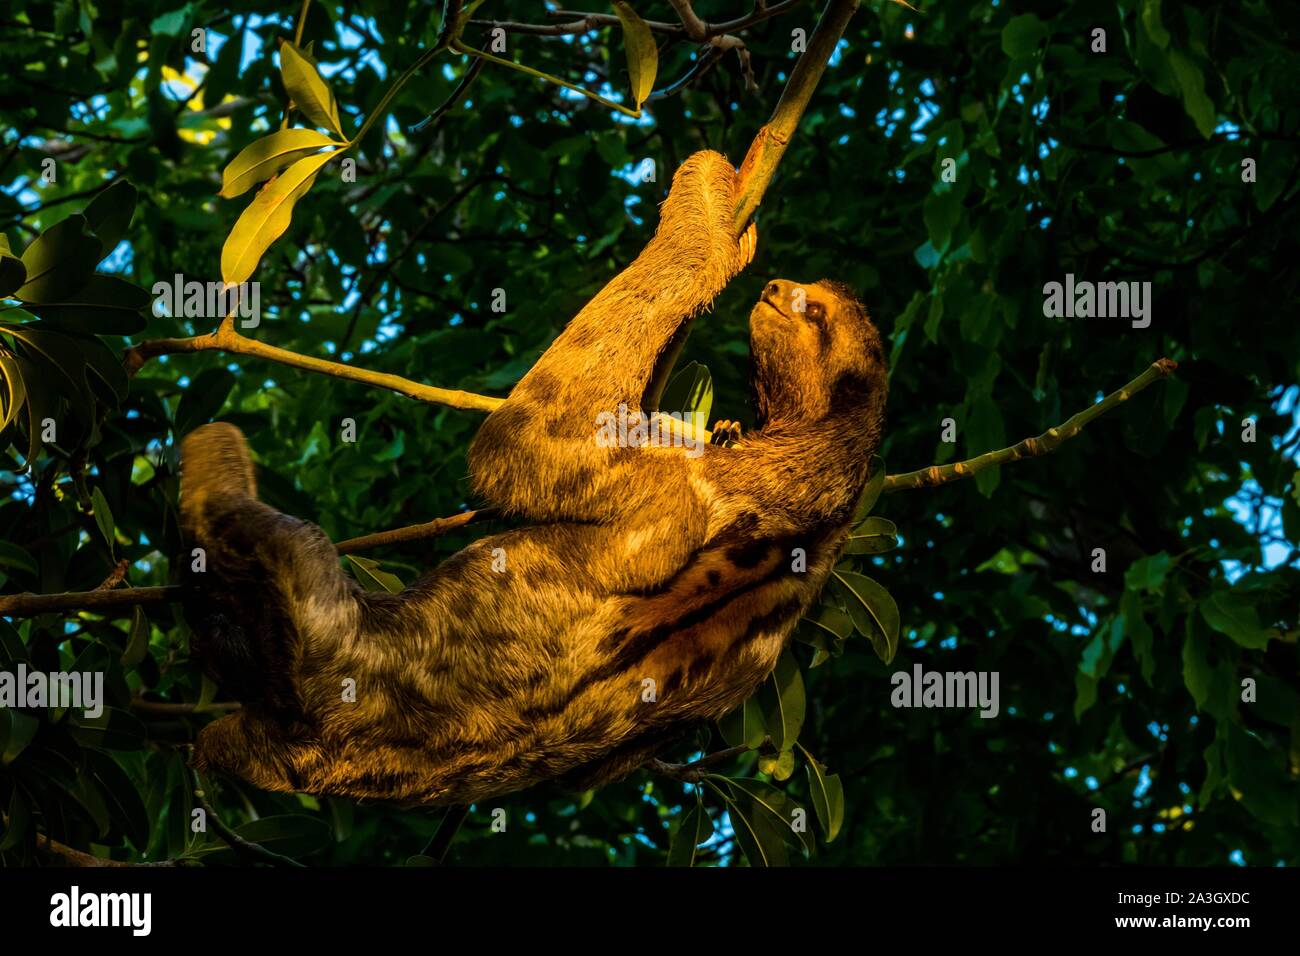 Colombia, Bolivar Department, Cartagena of the Indies, colonial center registered World Heritage bu UNESCO, three-toed sloth or Bradypus variegatus in the Parque Centenario Stock Photo